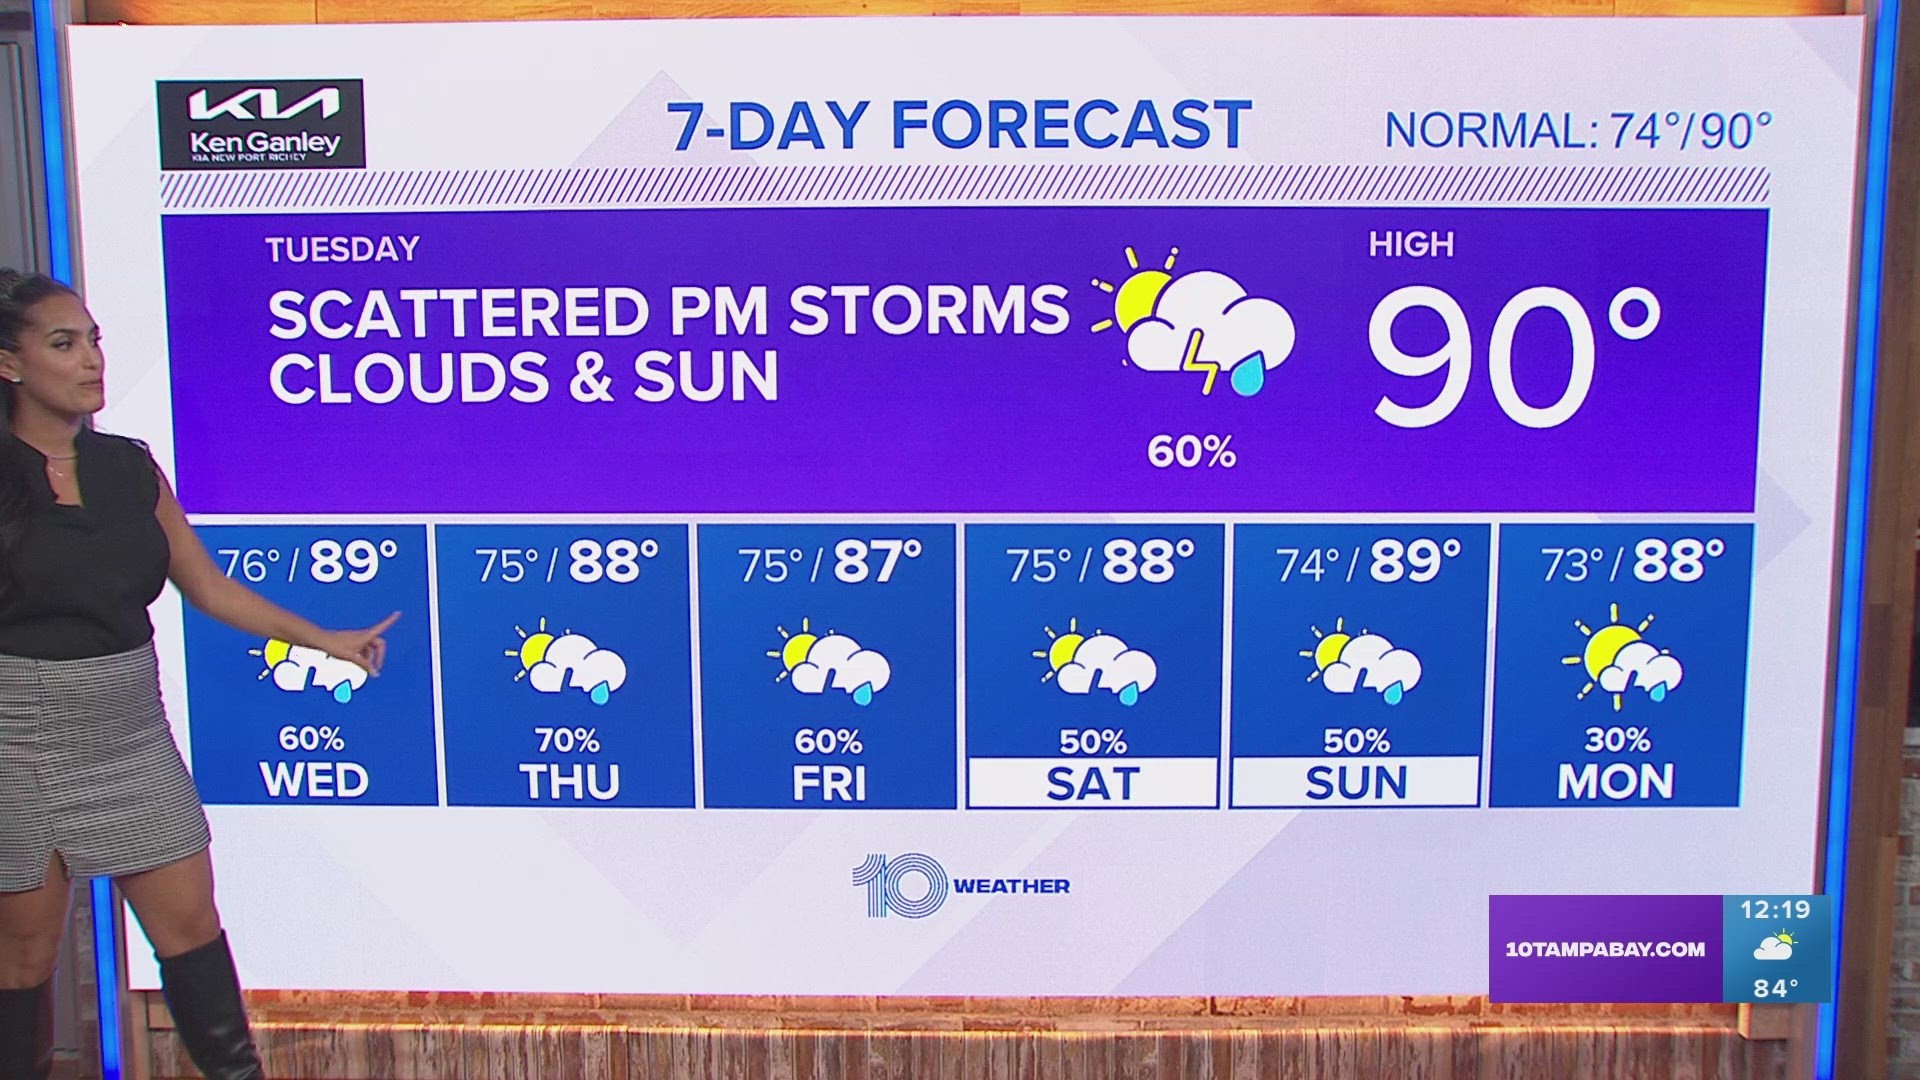 Scattered showers and thunderstorms will be possible each day this work week. Some downpours will be heavy, at times.